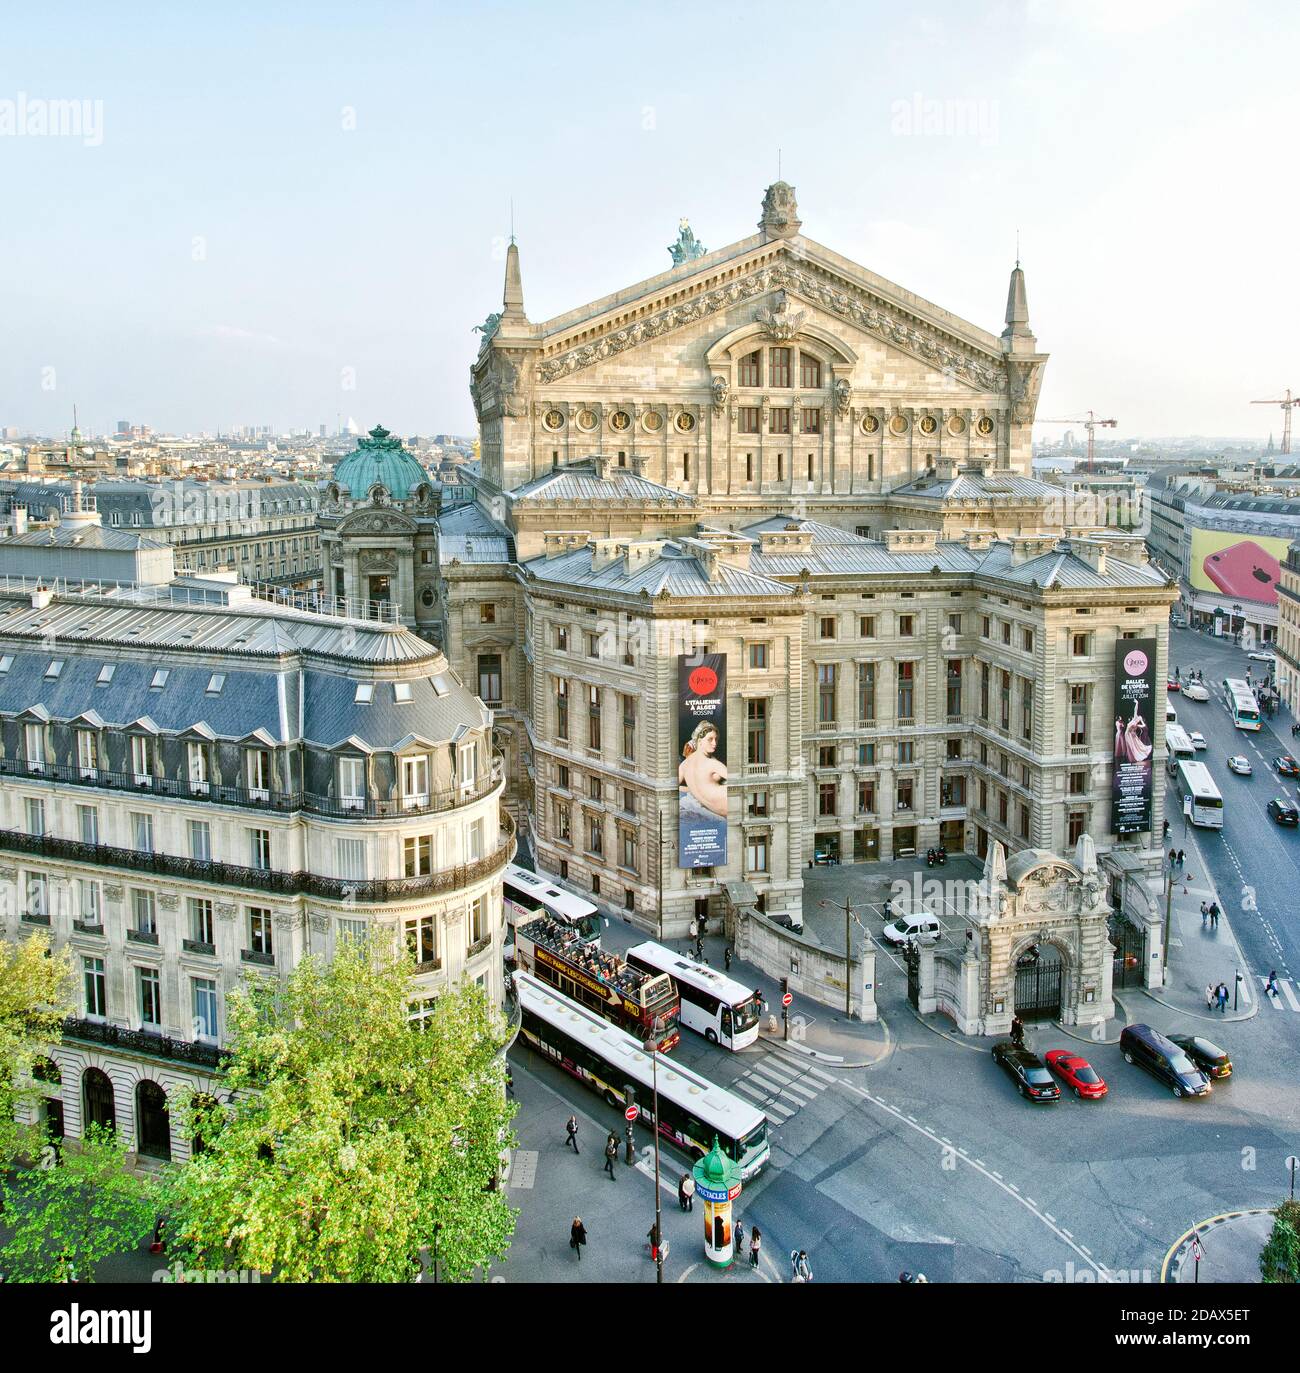 Photot of Opera Garnier's building. View from Galeries Lafayette. Paris, France. The Palais Garnier (Garnier Palace) or Opera Garnier, is a 1,979-seat Stock Photo